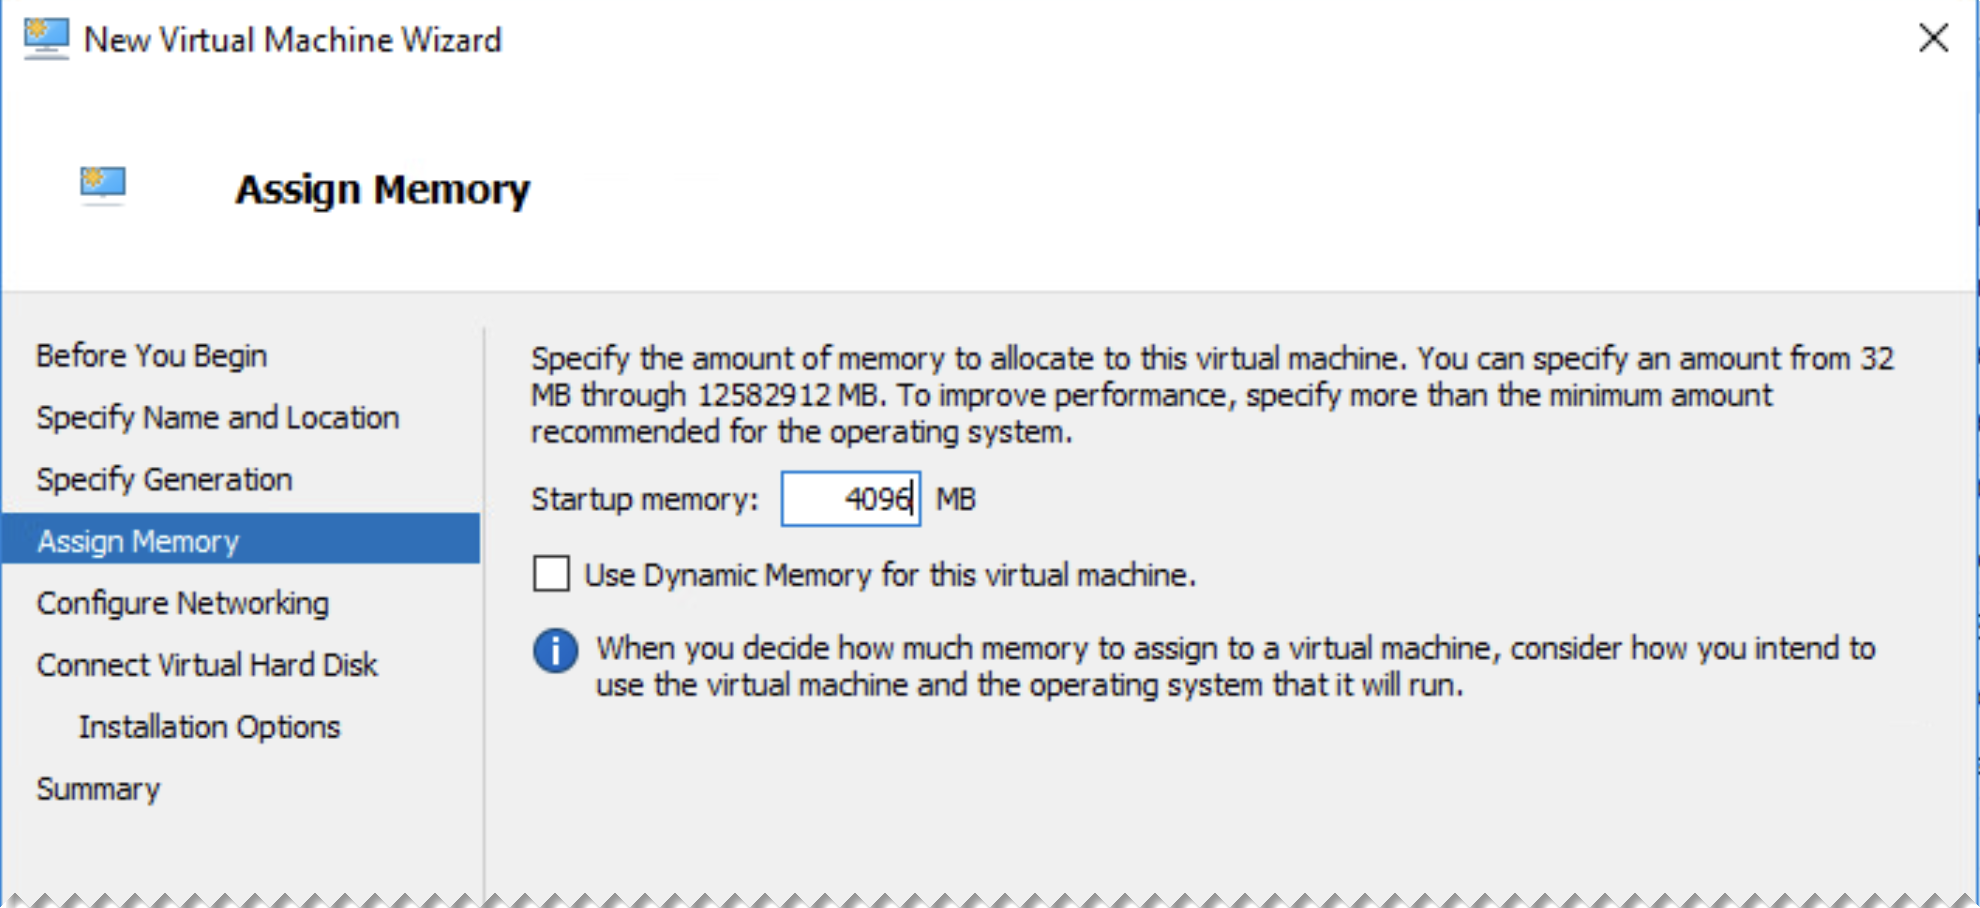 Assign Memory page